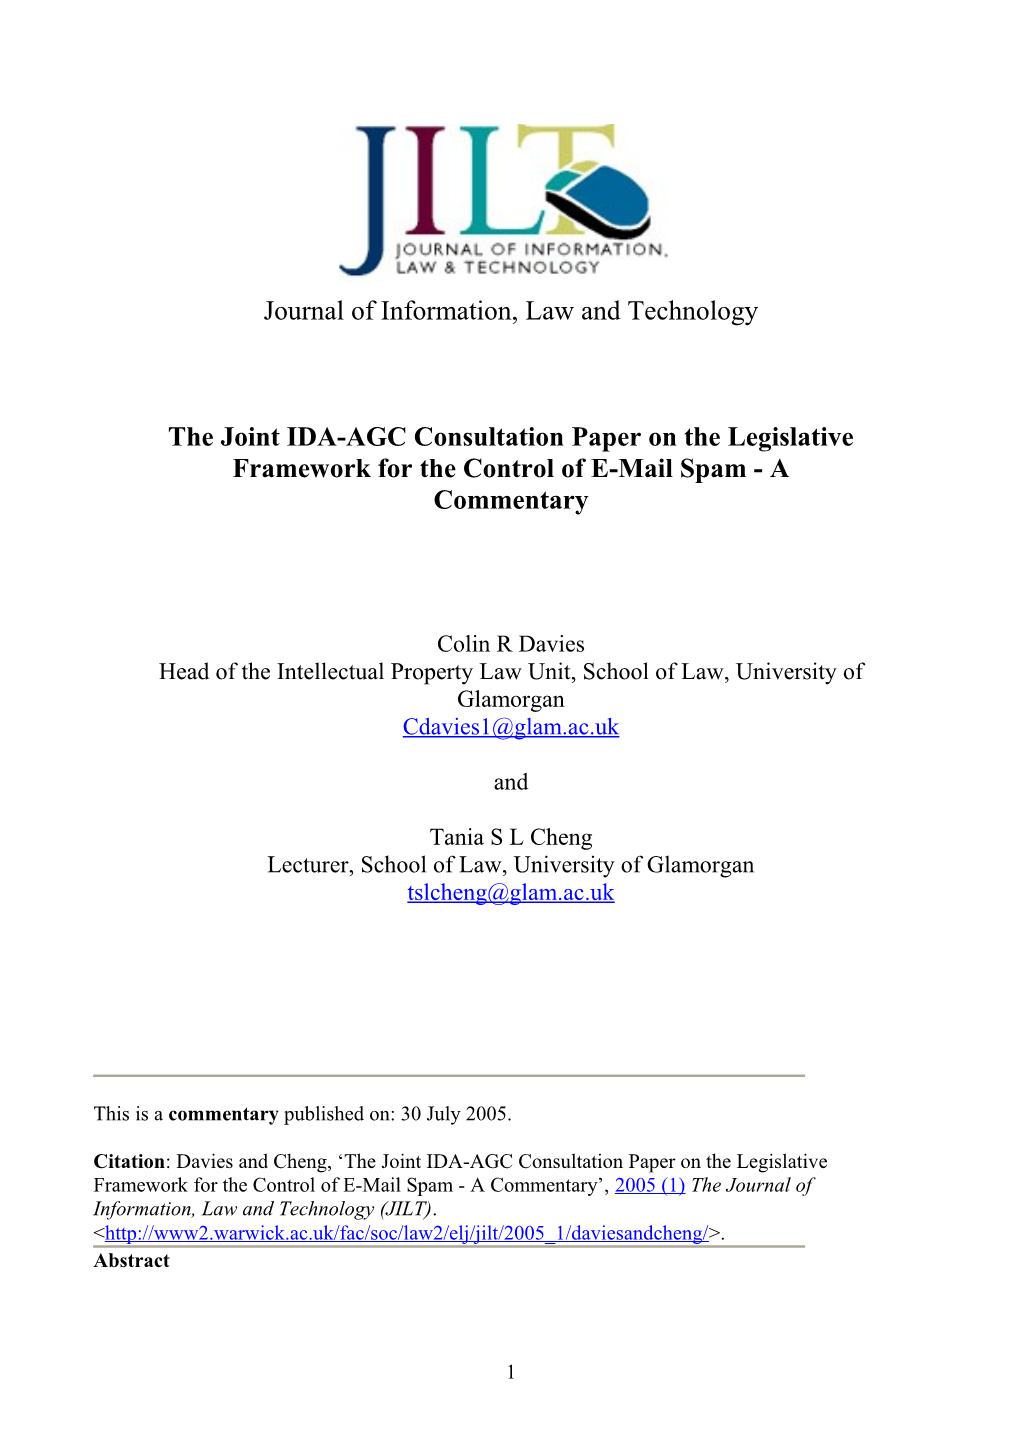 The Joint Ida-Agc Consultation Paper on the Legislative Framework for the Control of E-Mail